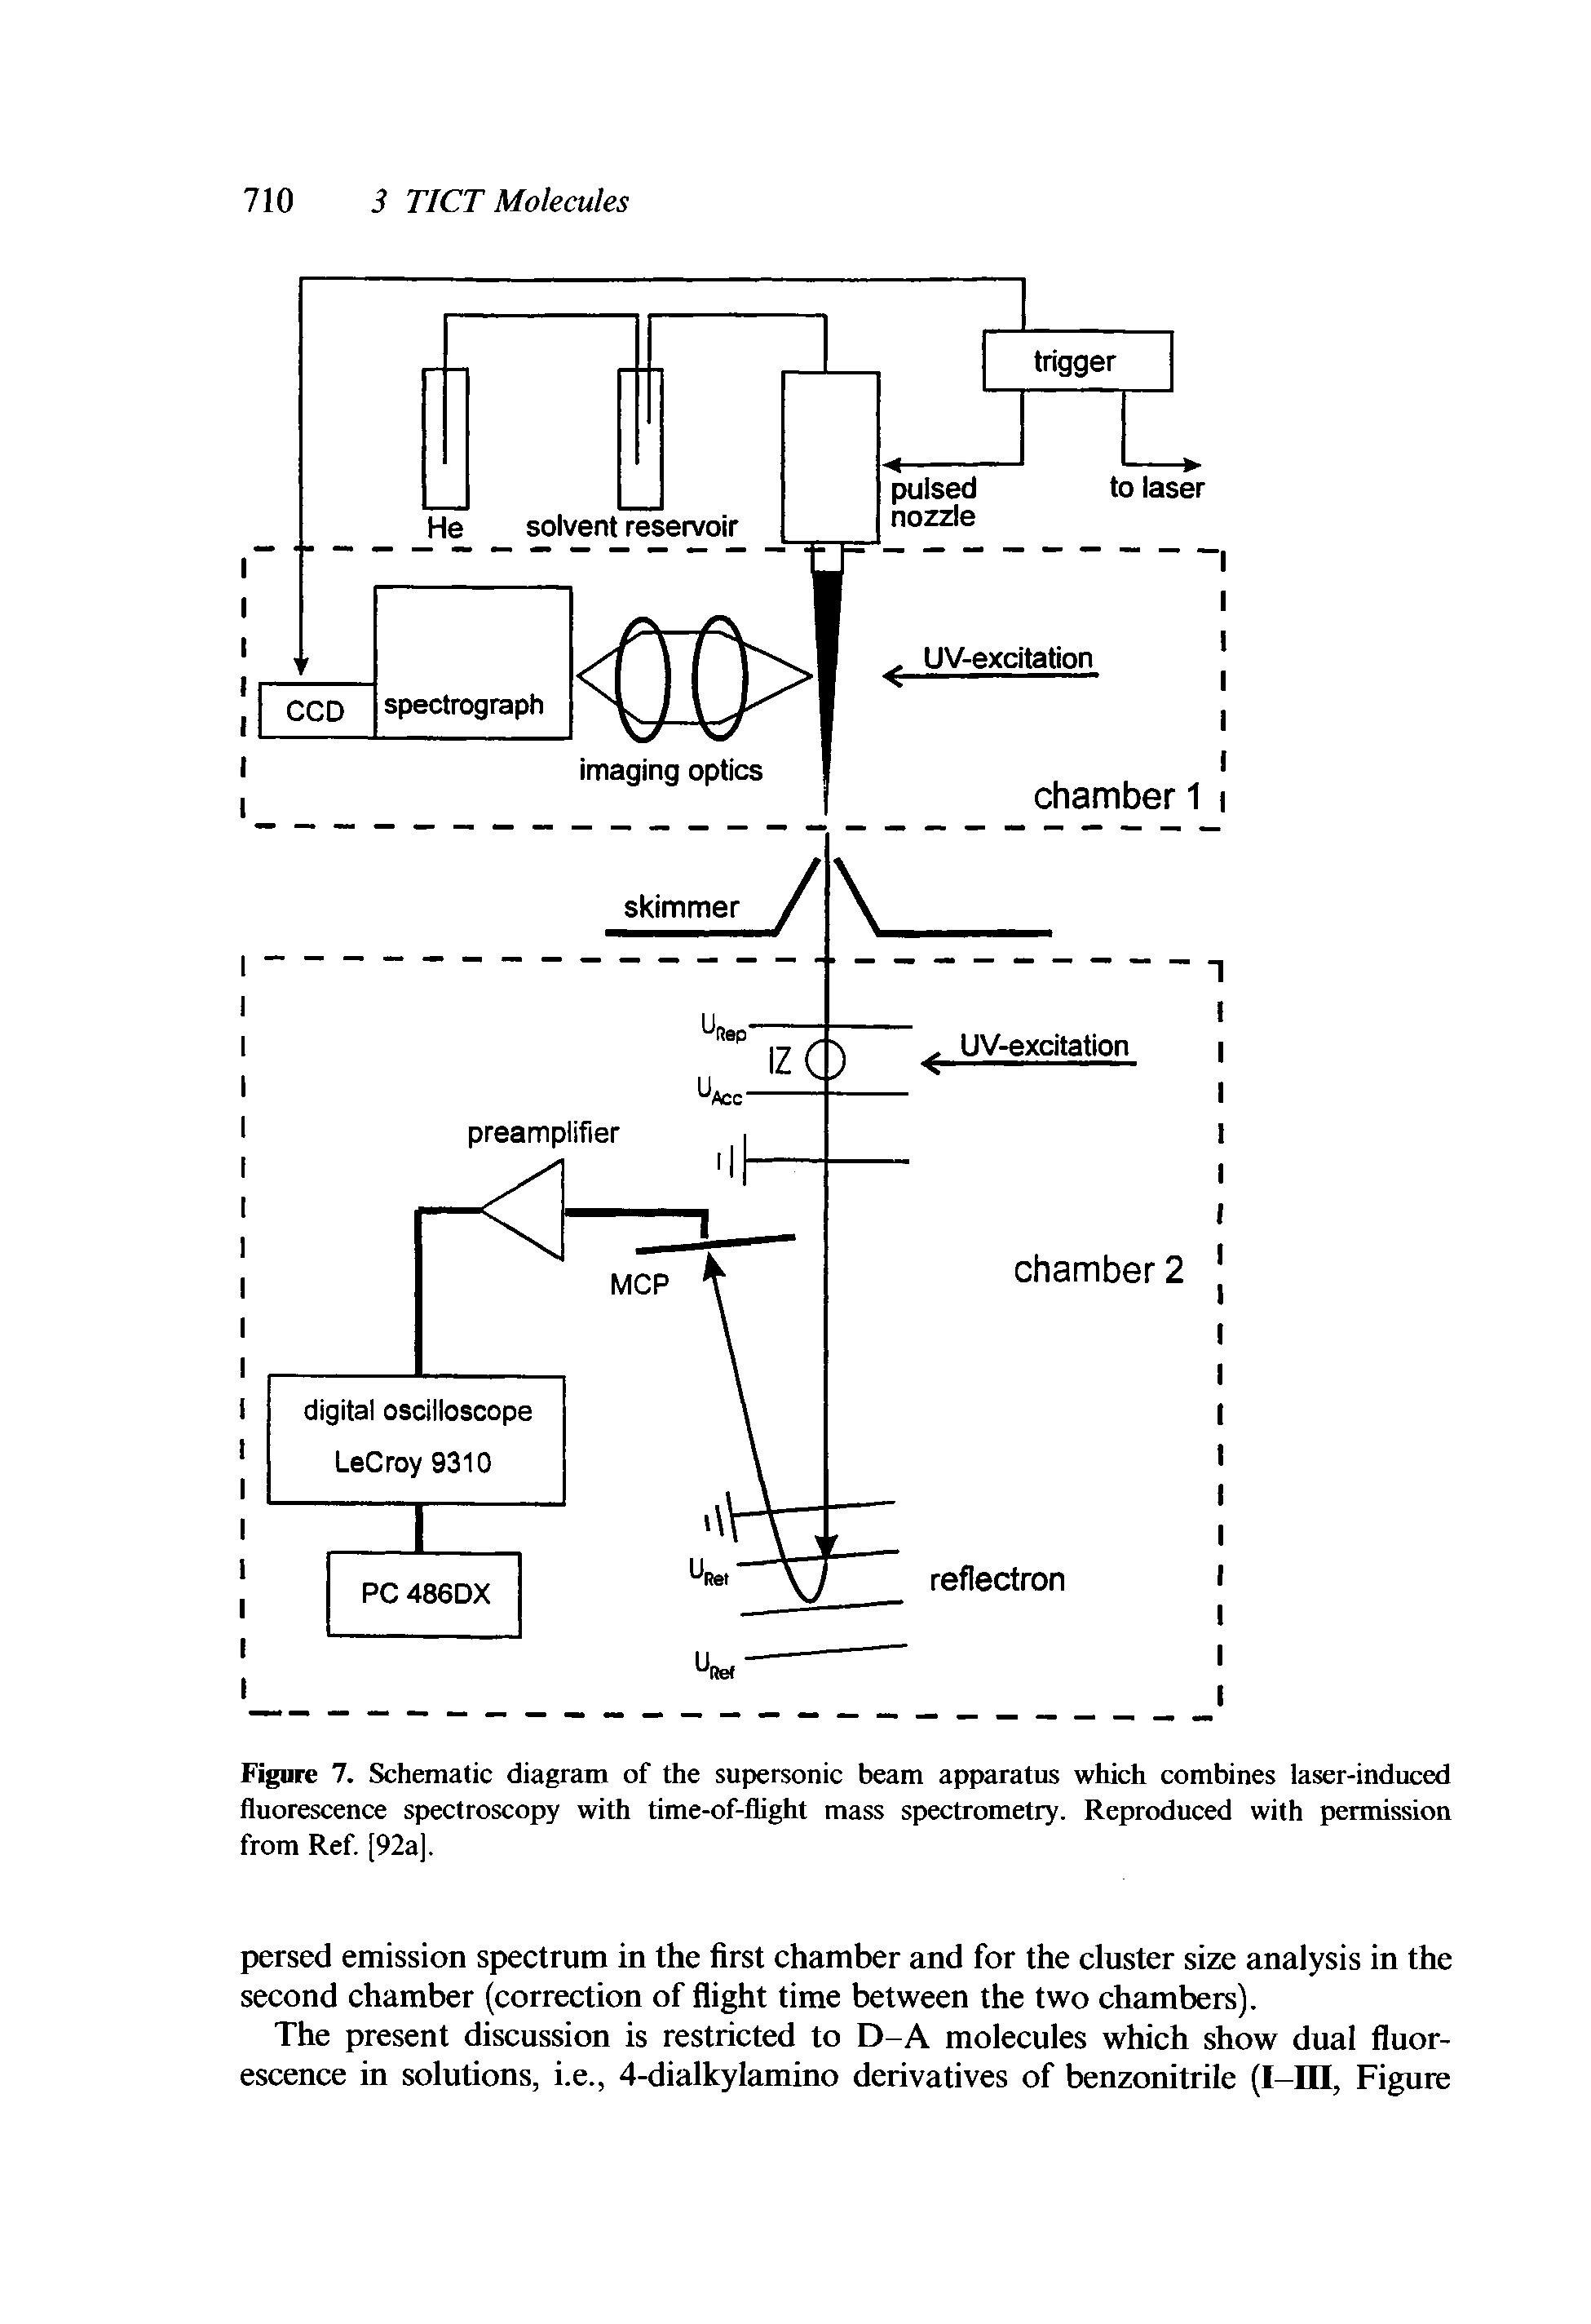 Figure 7. Schematic diagram of the supersonic beam apparatus which combines laser-induced fluorescence spectroscopy with time-of-flight mass spectrometry. Reproduced with permission from Ref [92a].